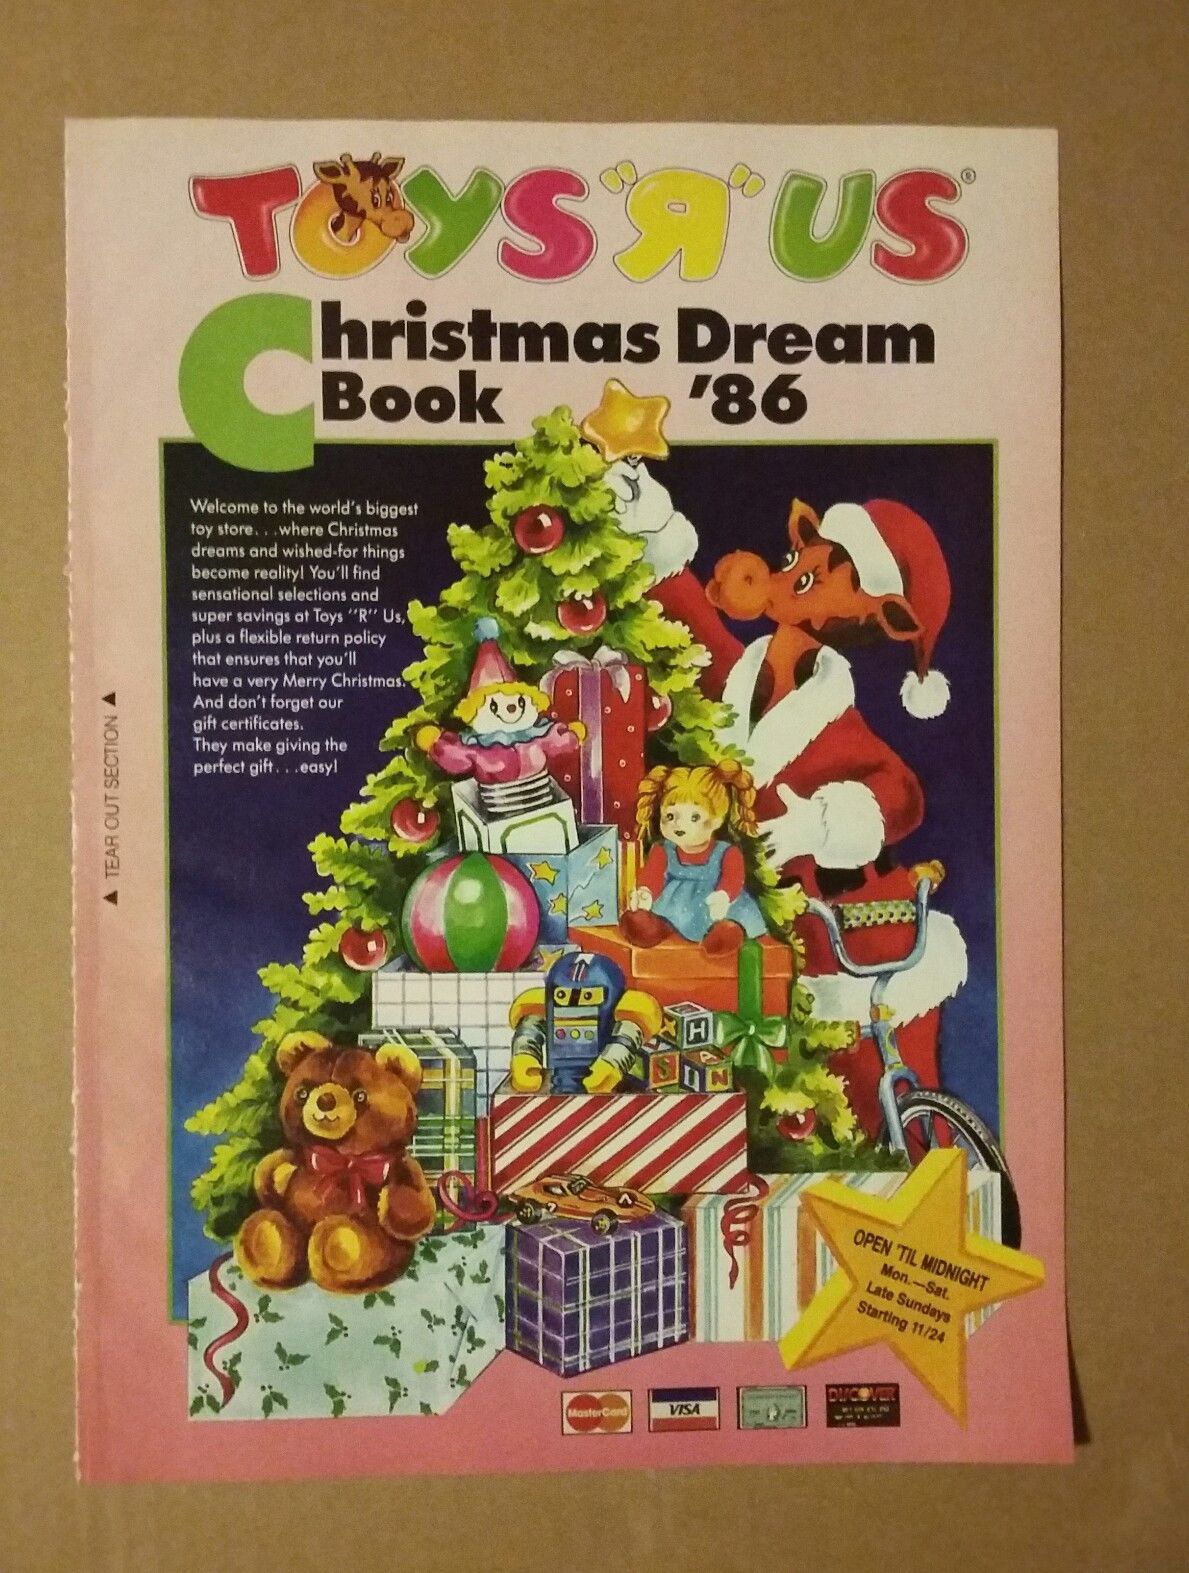 toys r us christmas book - Tys Tus Book 186 hristmas Dream Welcome to the world's biggest toy store. . where Christmas dreams and wished for things become reality! You'll find sensational selections and super savings at Toys"R" Us, plus a flexible return 